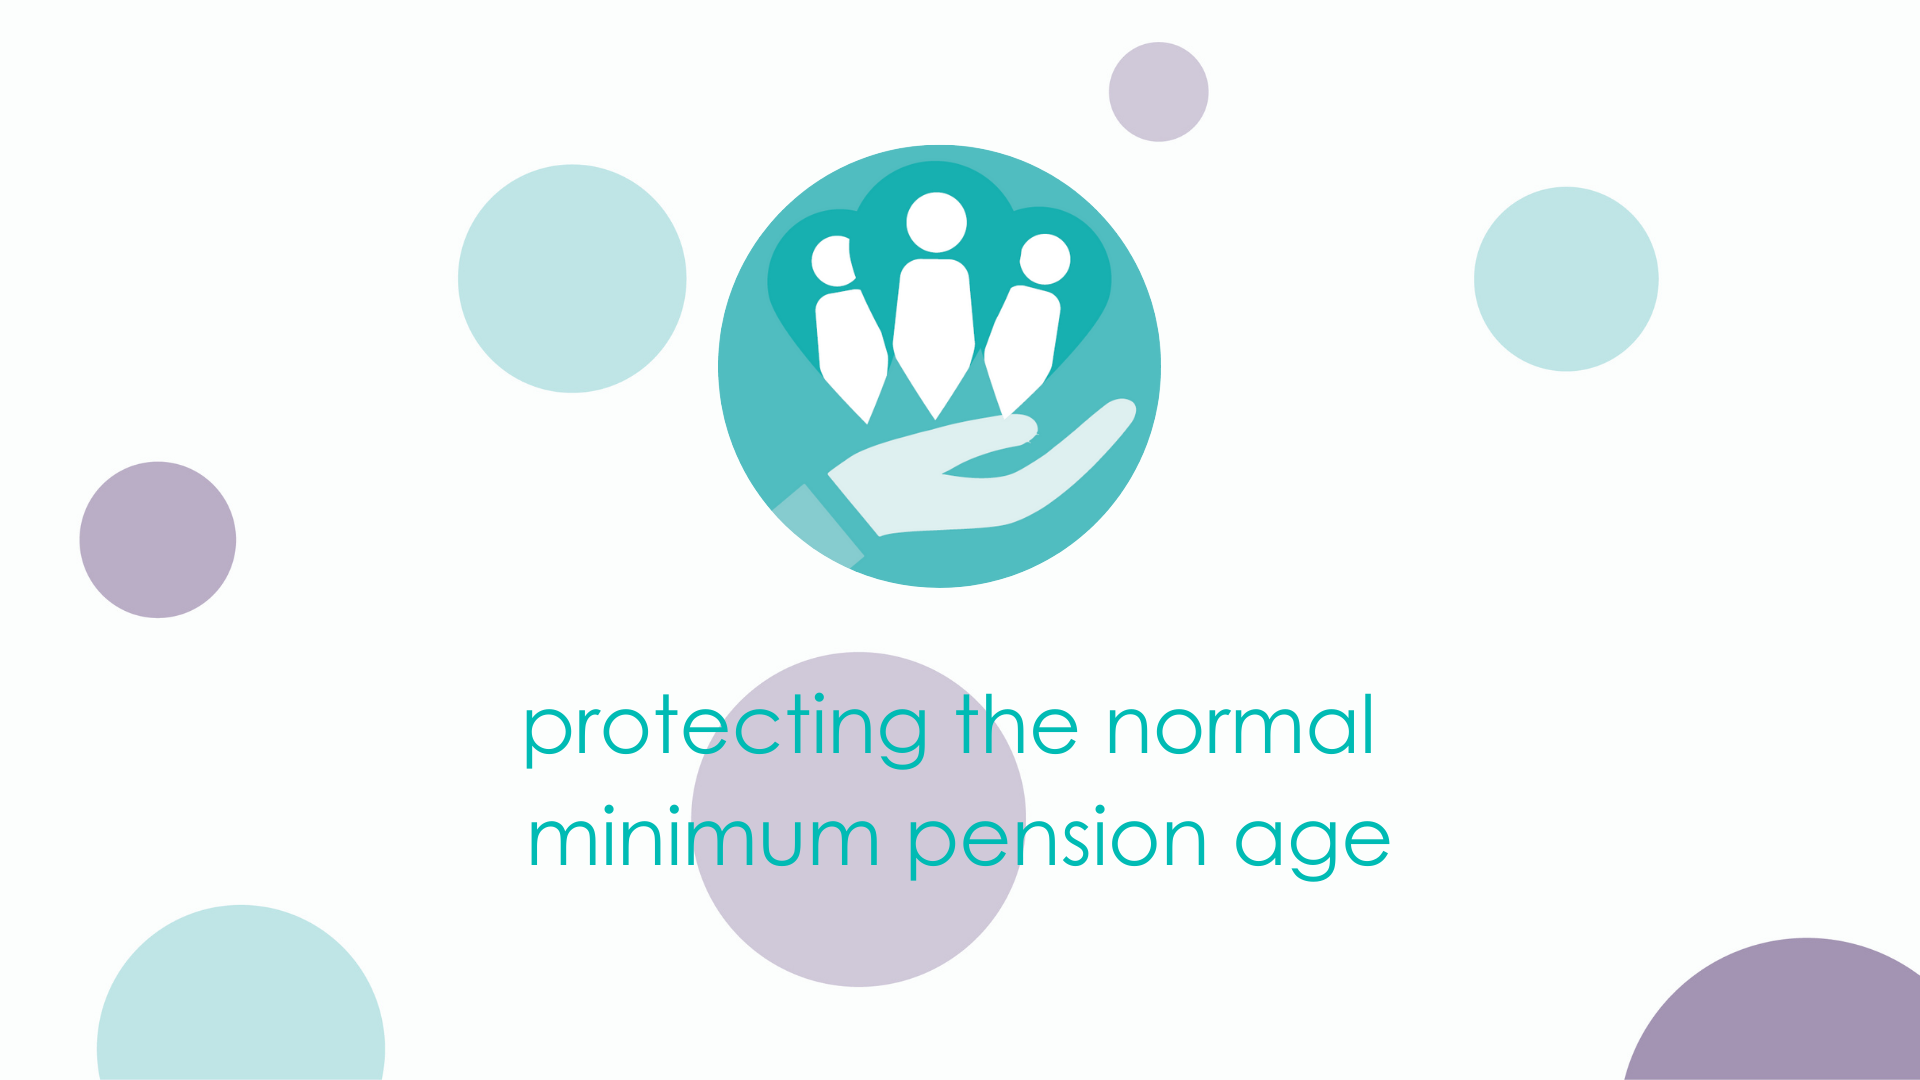 Protecting the normal minimum pension age